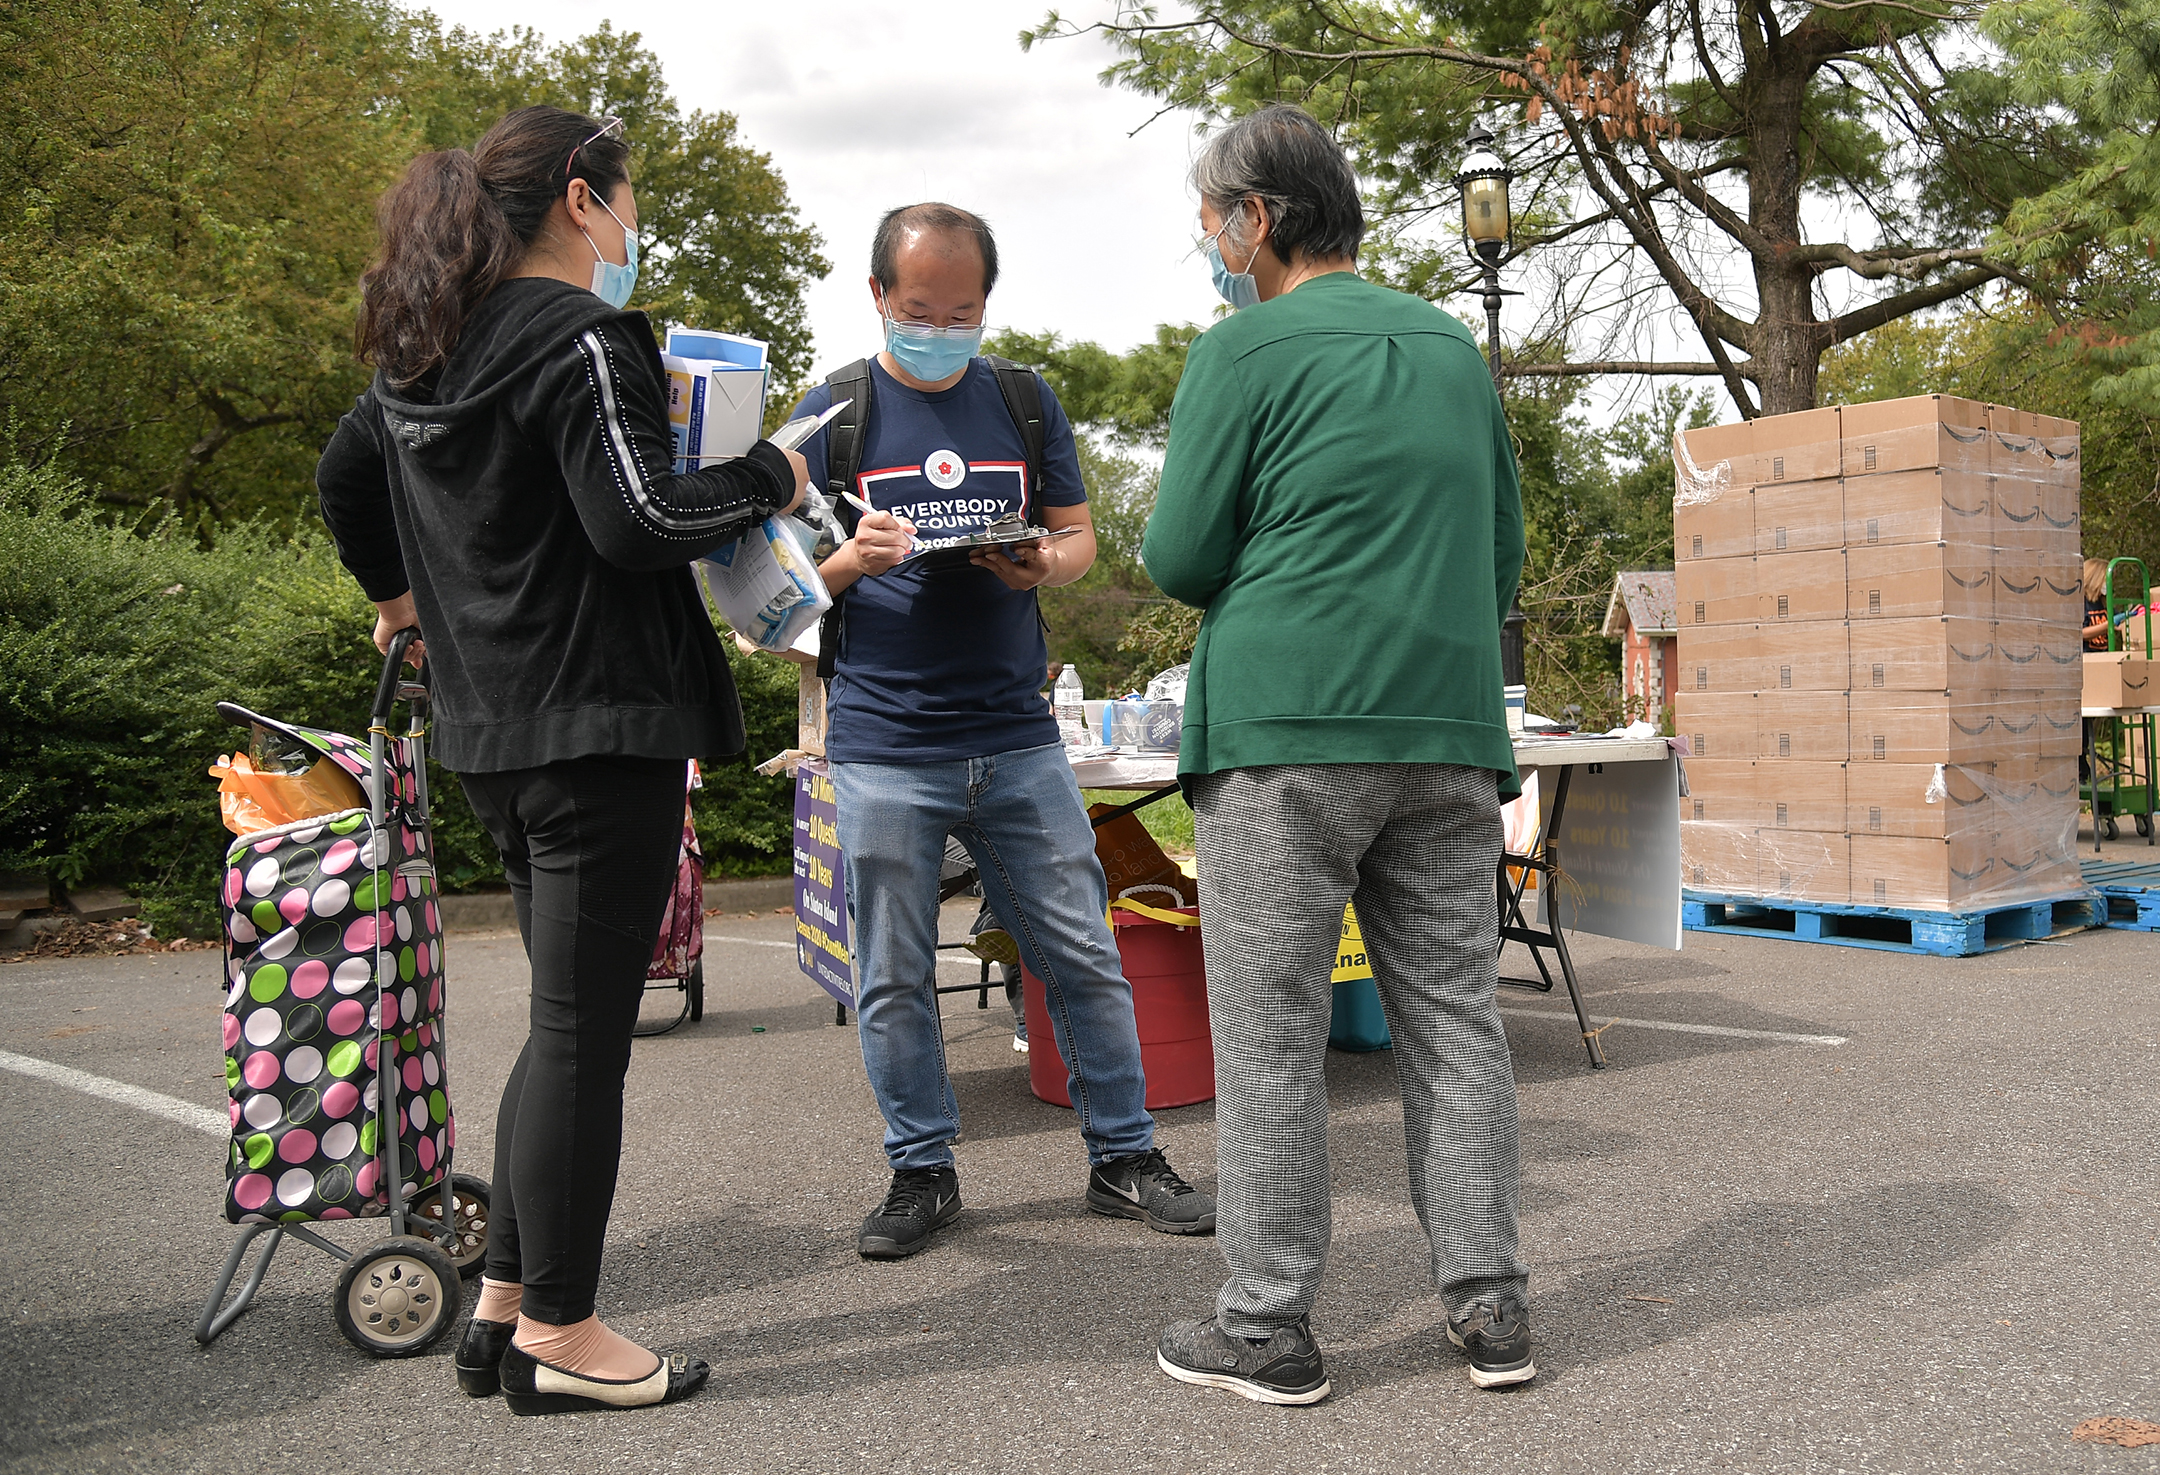 A census worker speaks to two people in a parking lot with a pallet of cardboard boxes in the background